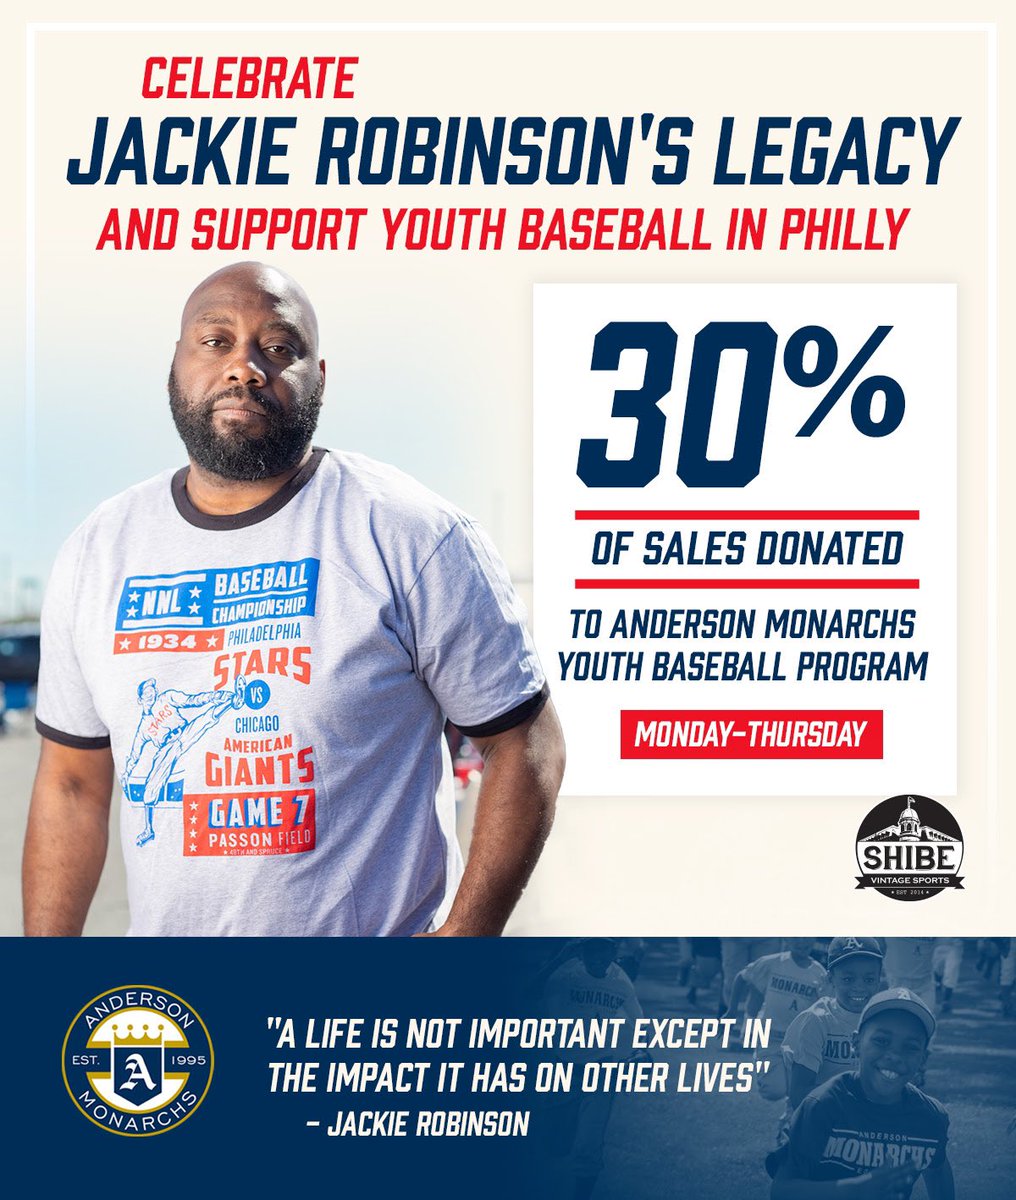 Happy Jackie Robinson Day! Our annual fundraiser to support @AndersonMonarch begins today. 30% of all sales between now and Thursday will be donated to help support youth baseball in Philly. 🧢: shibevintagesports.com